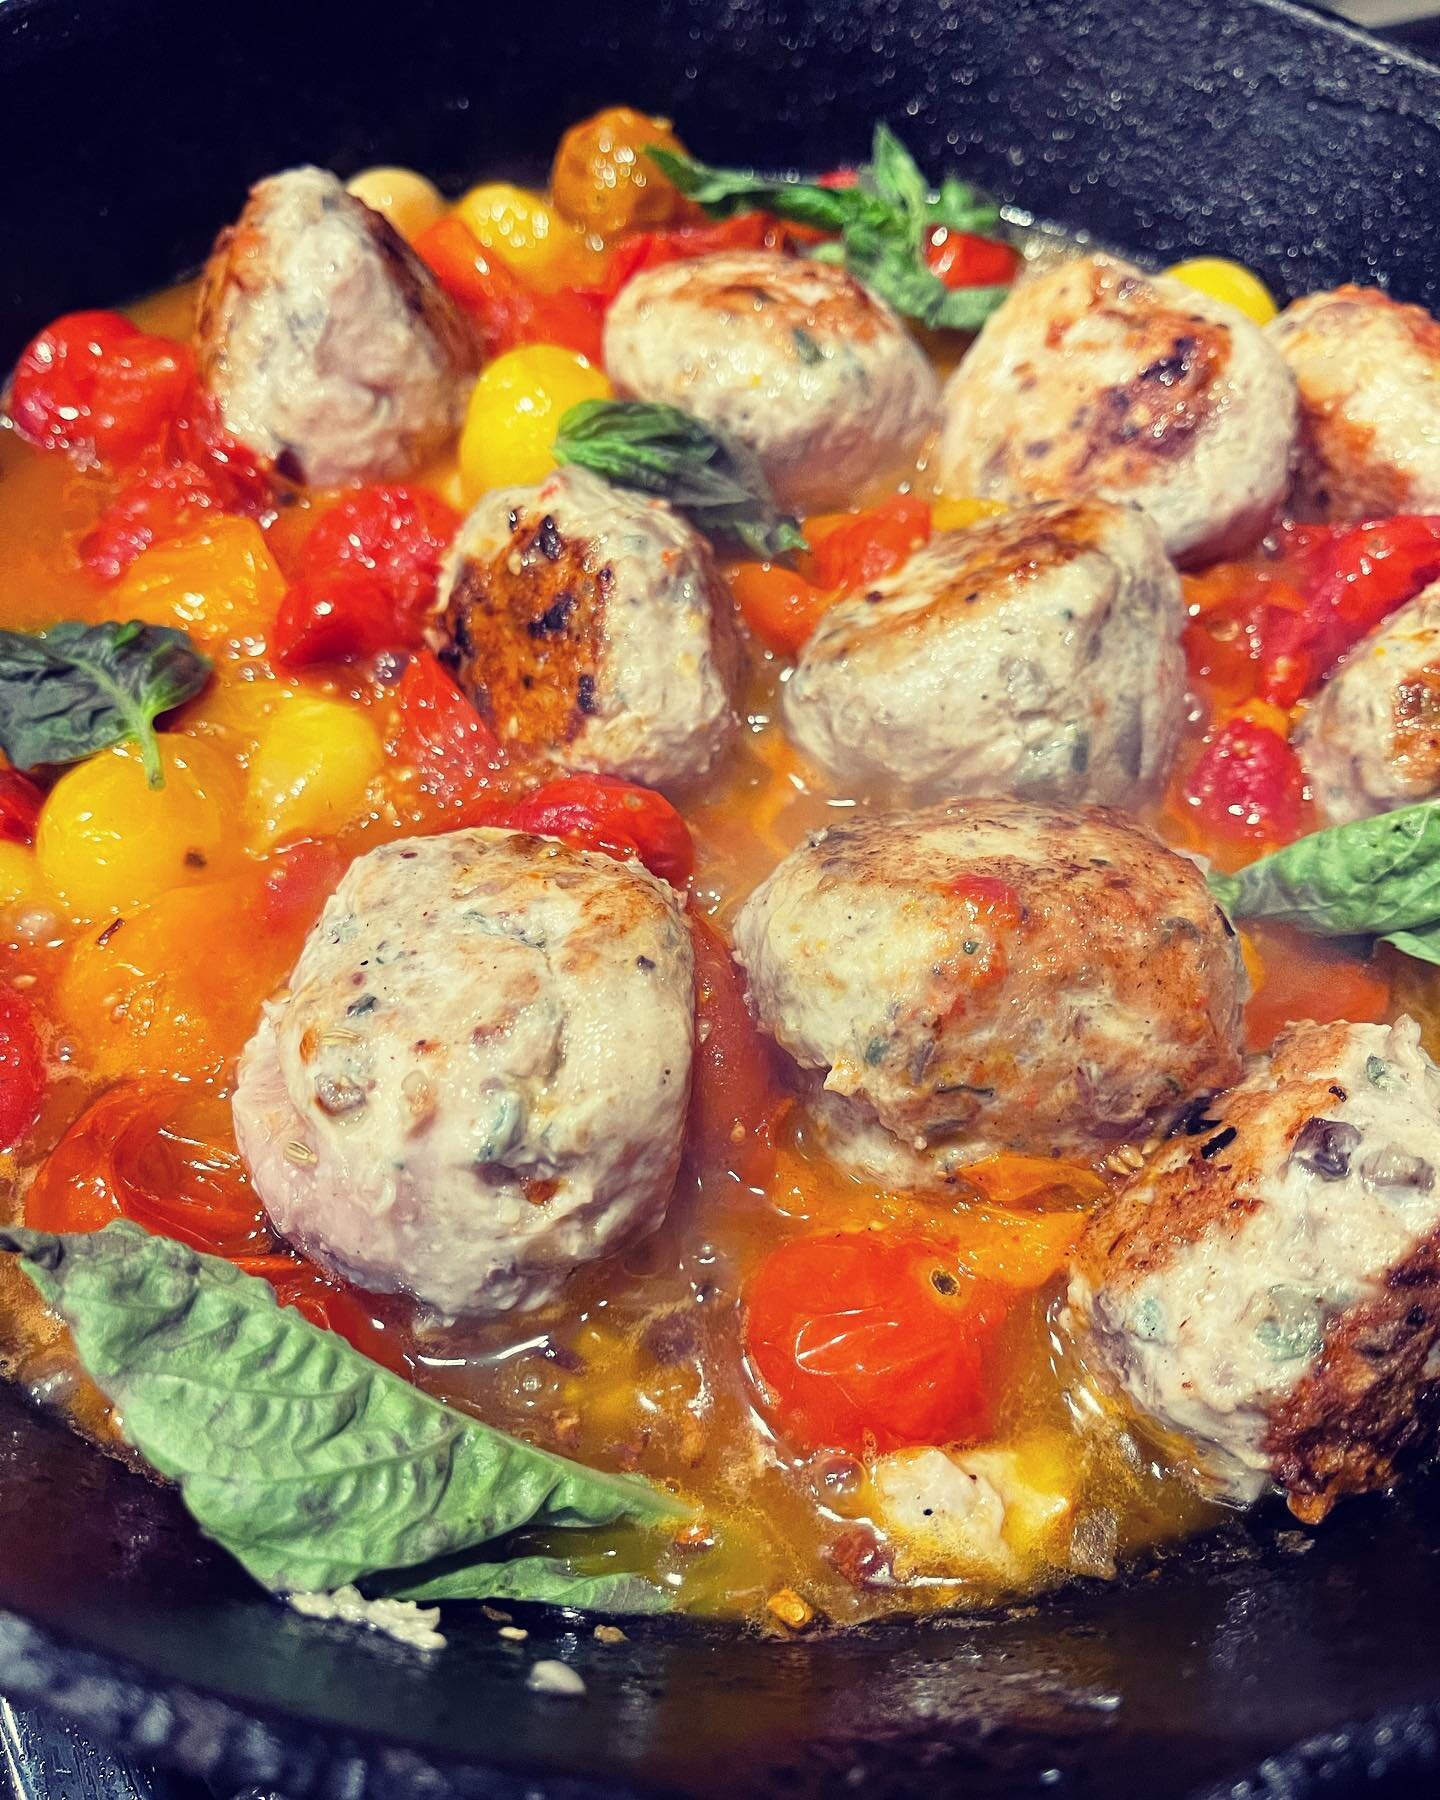 Dinner tonight were these Chicken Meatballs w/ Roasted cherry Tomatoes and Basil.  The secret nutritional powerhouse ingredient&hellip; I mixed in finely chopped chicken livers!  Organ meat is arguably the most nutrient dense source of protein. They 